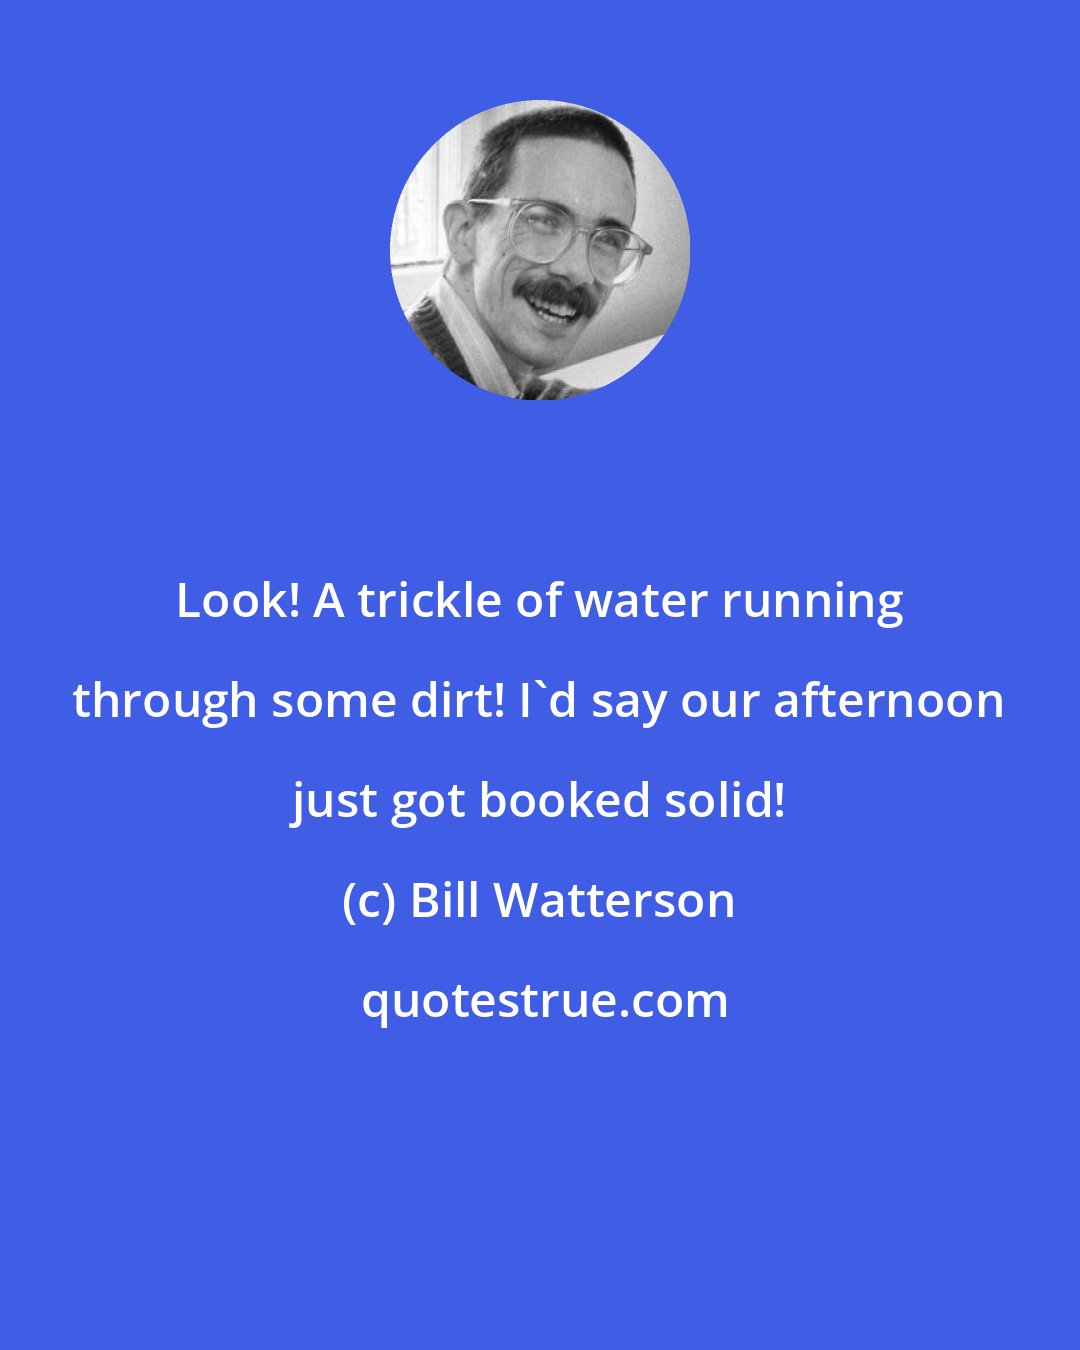 Bill Watterson: Look! A trickle of water running through some dirt! I'd say our afternoon just got booked solid!